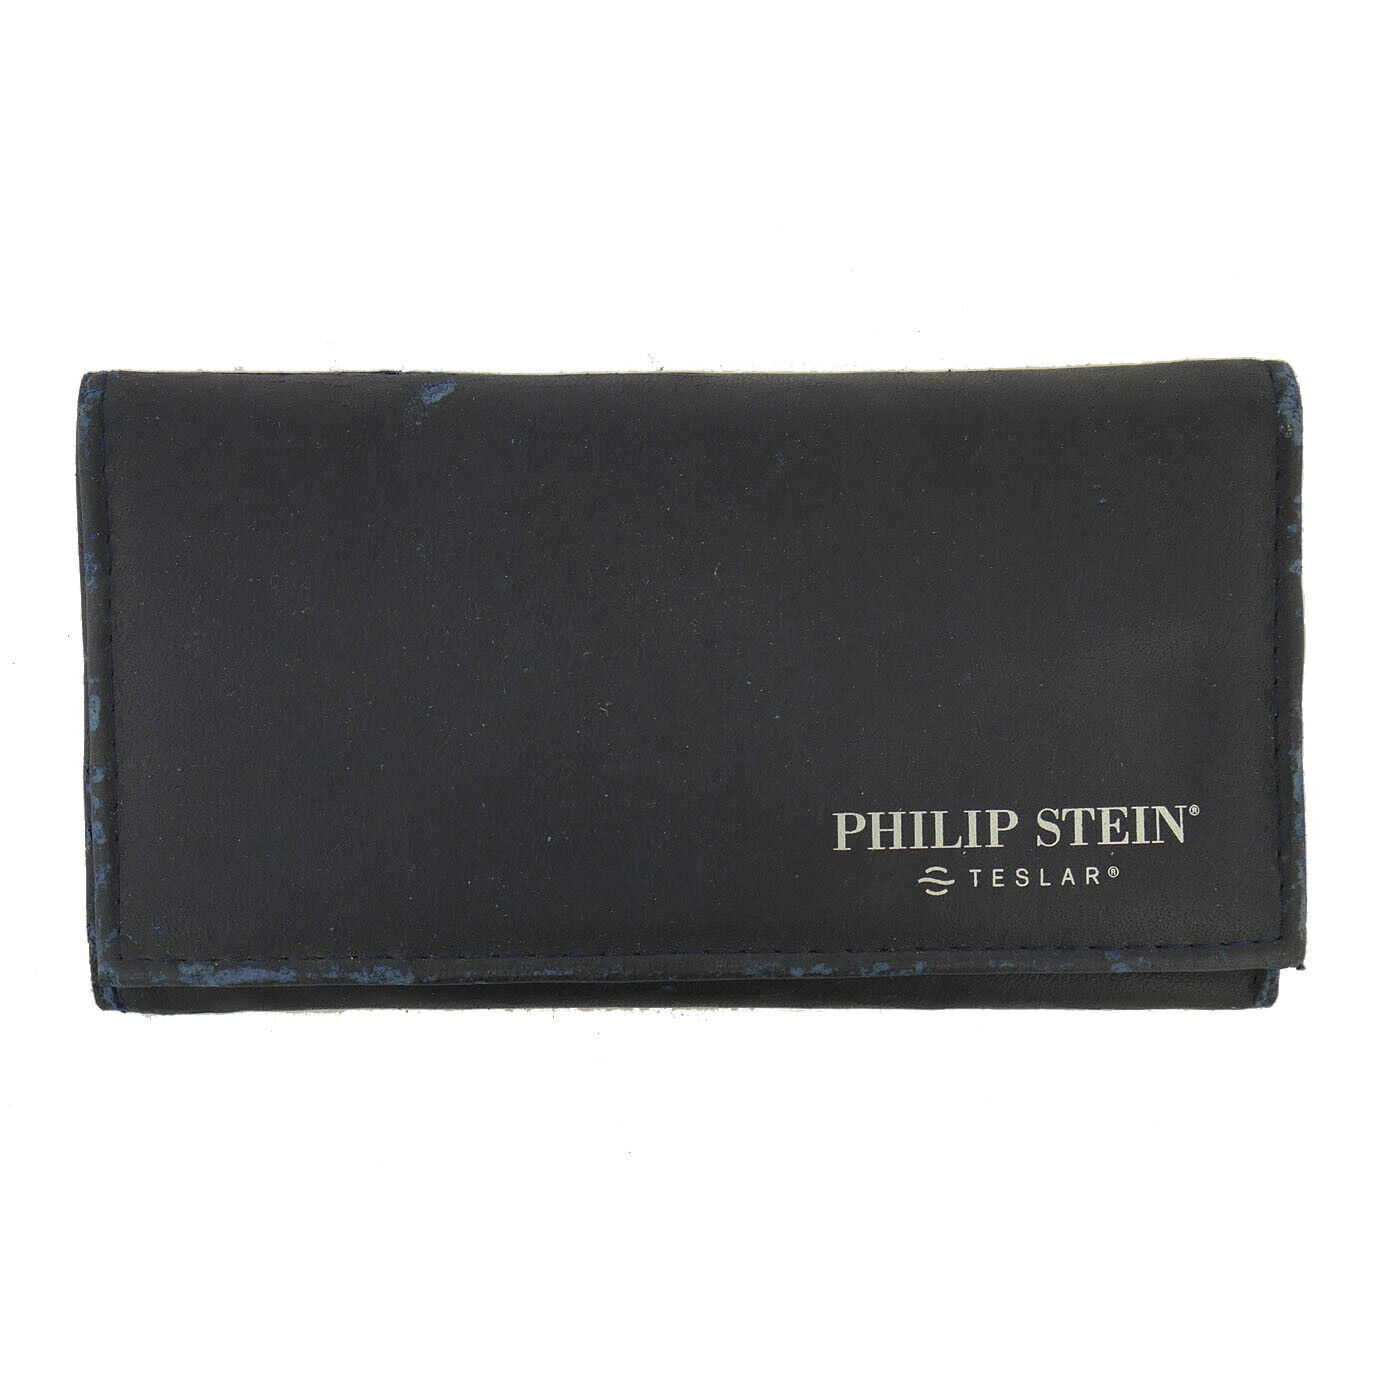 PHILIP STEIN TESLAR WATCH BLUE WALLET FOR MANUALS AND STRAPS